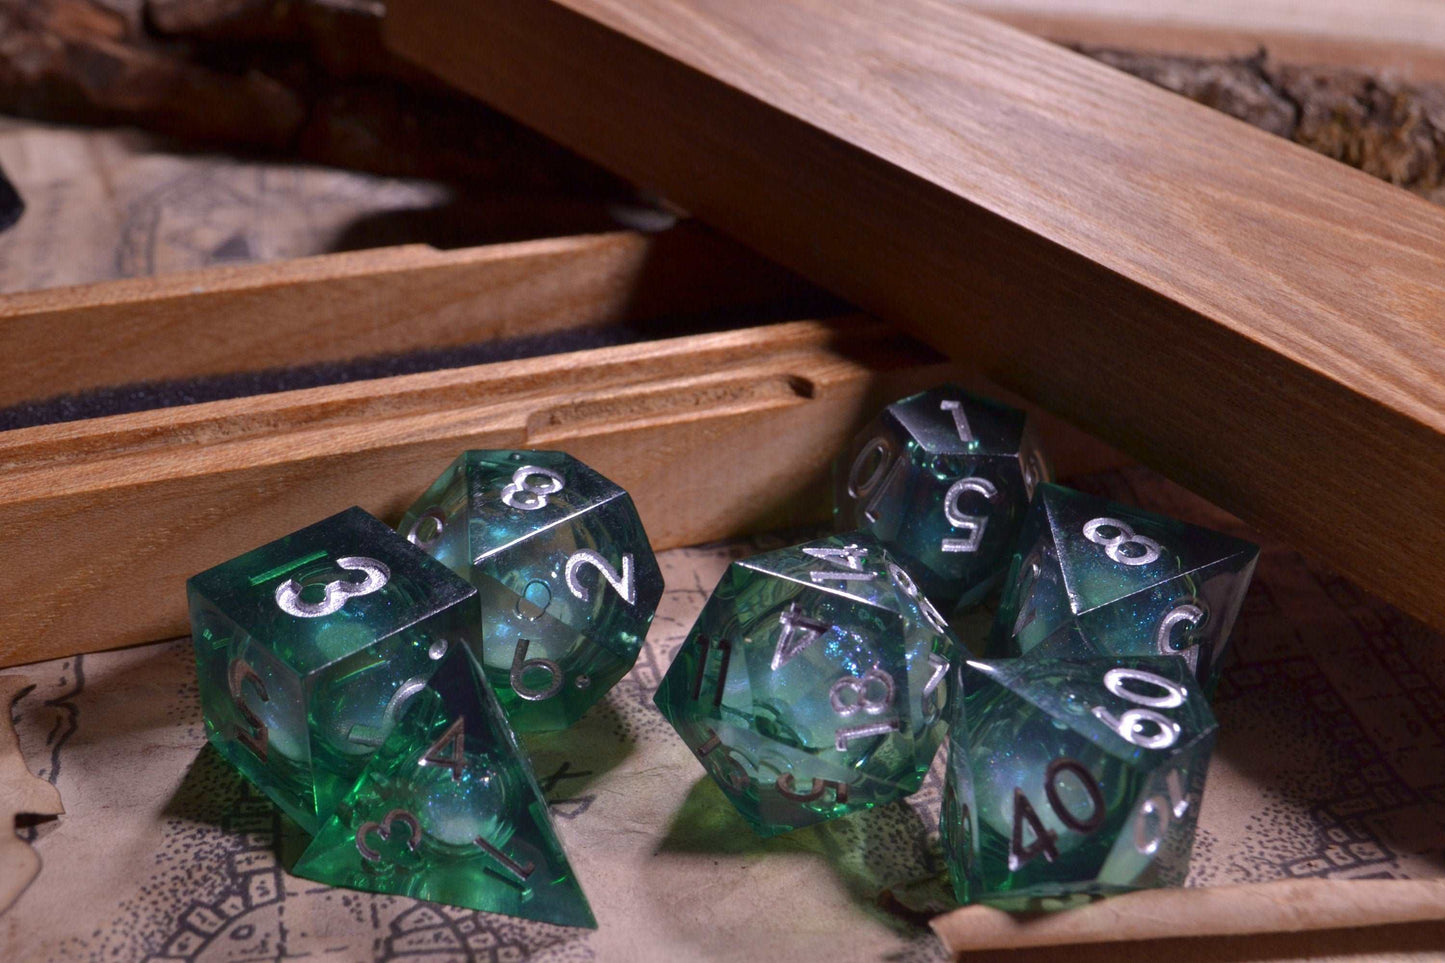 Eldritch Fae Green Sharp Edge Liquid Core Resin D&D Dice Set With Metallic Silver Numbering - For Dungeons and Dragons - Gift Set